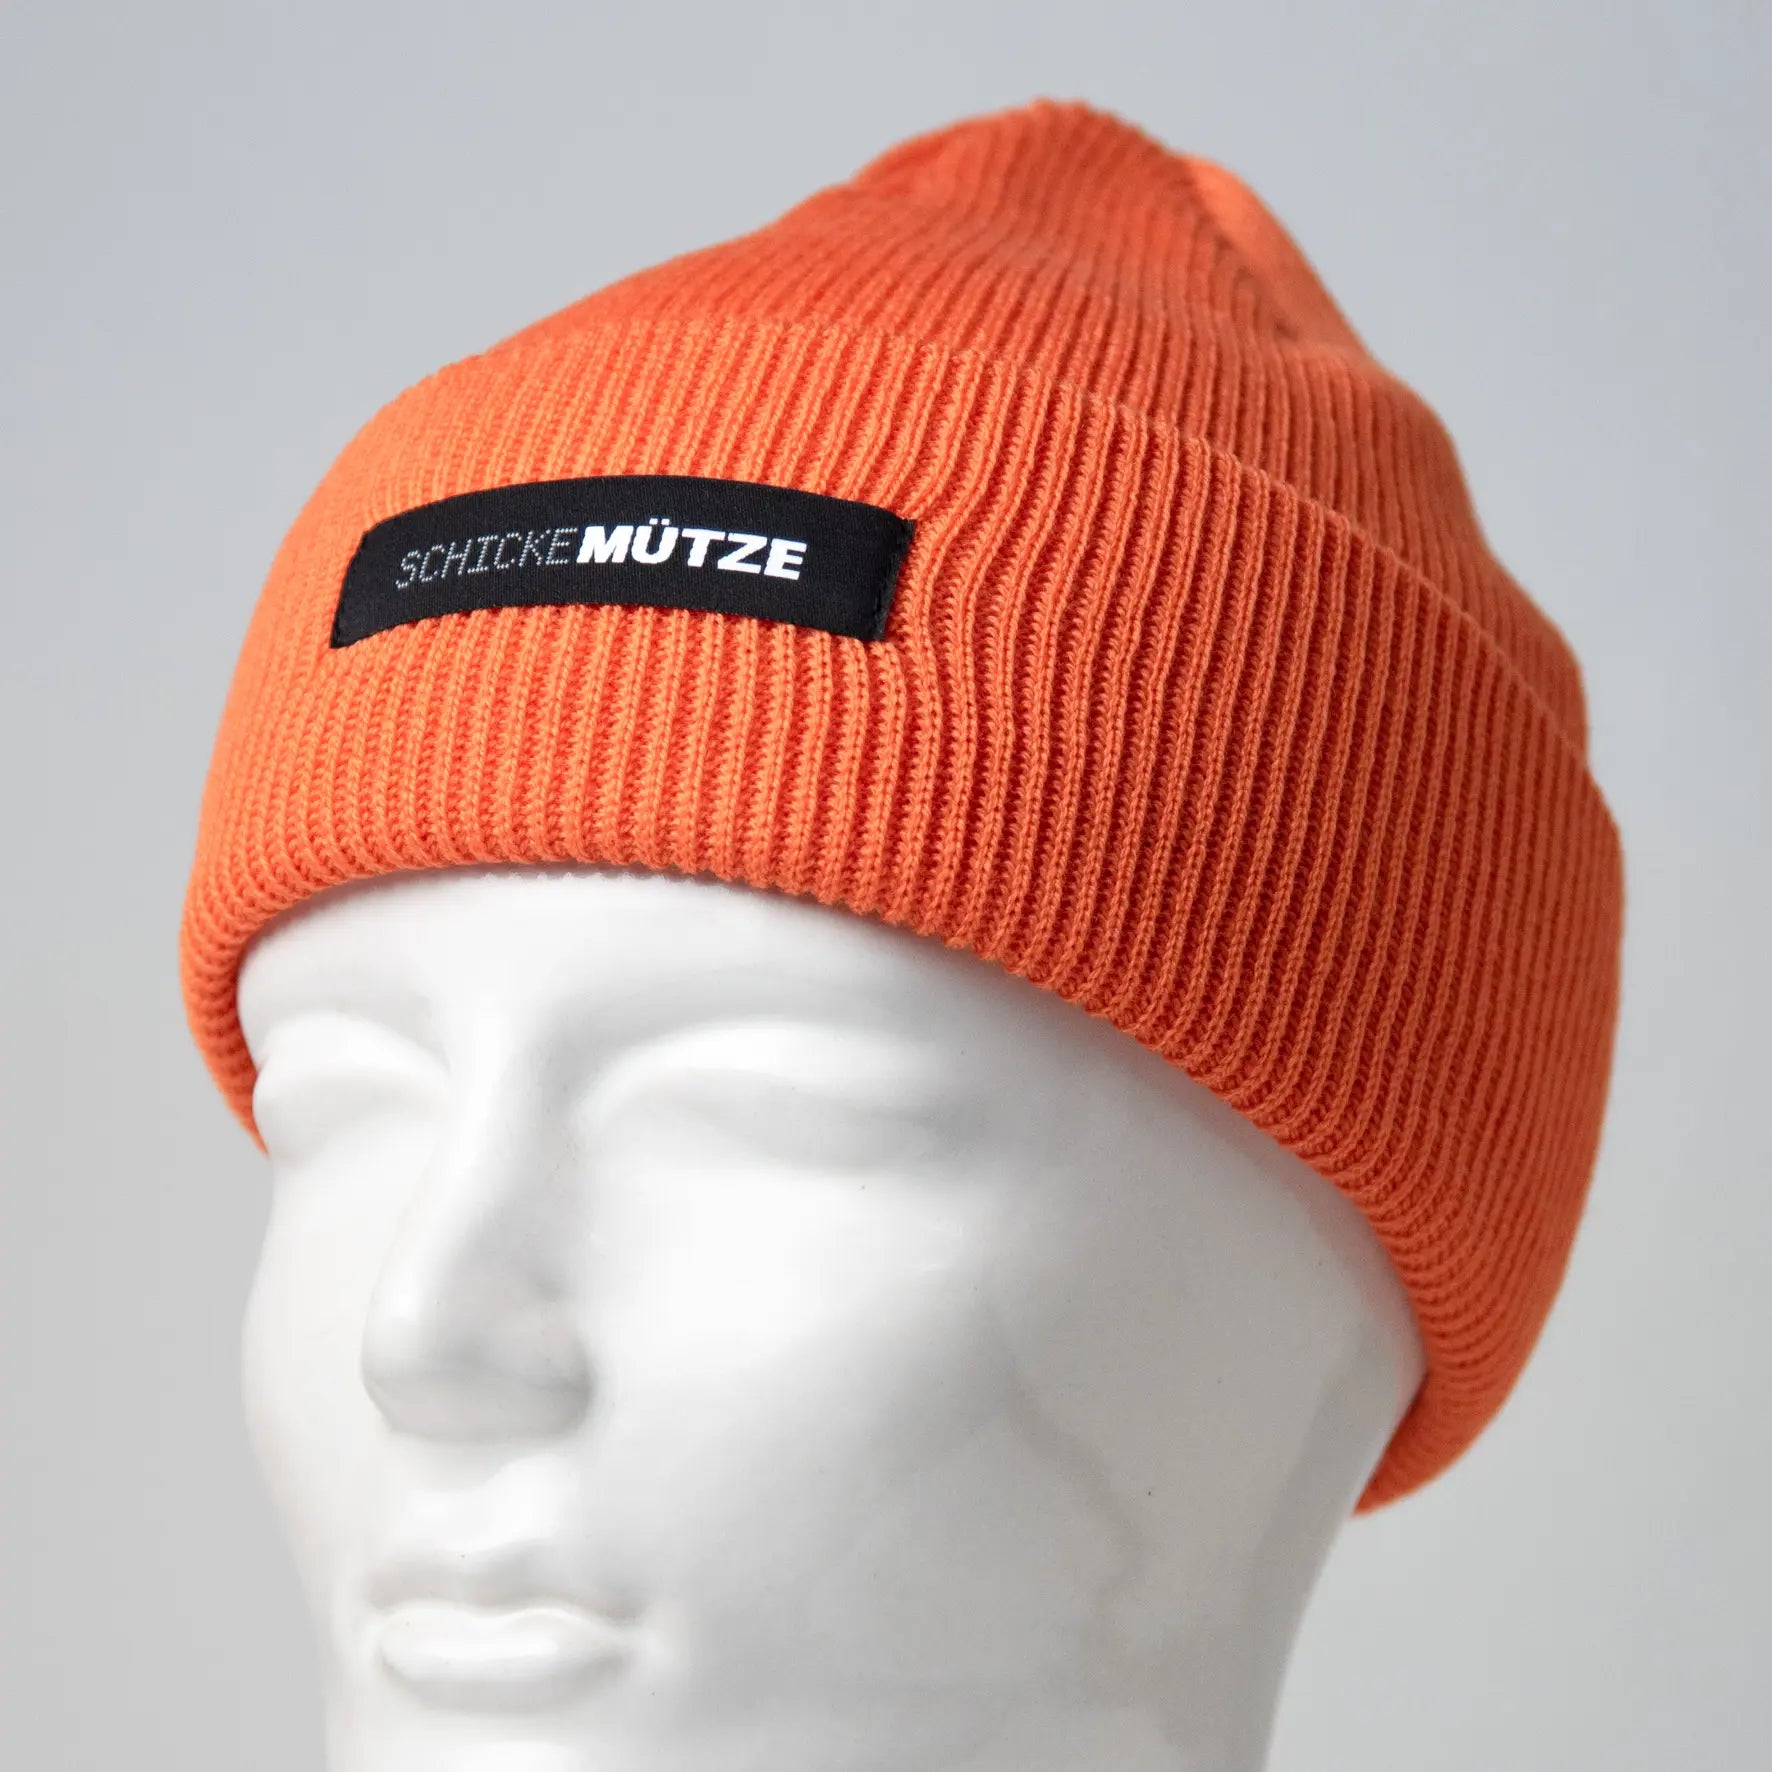 Chic knitted hat with fine knit ribbing